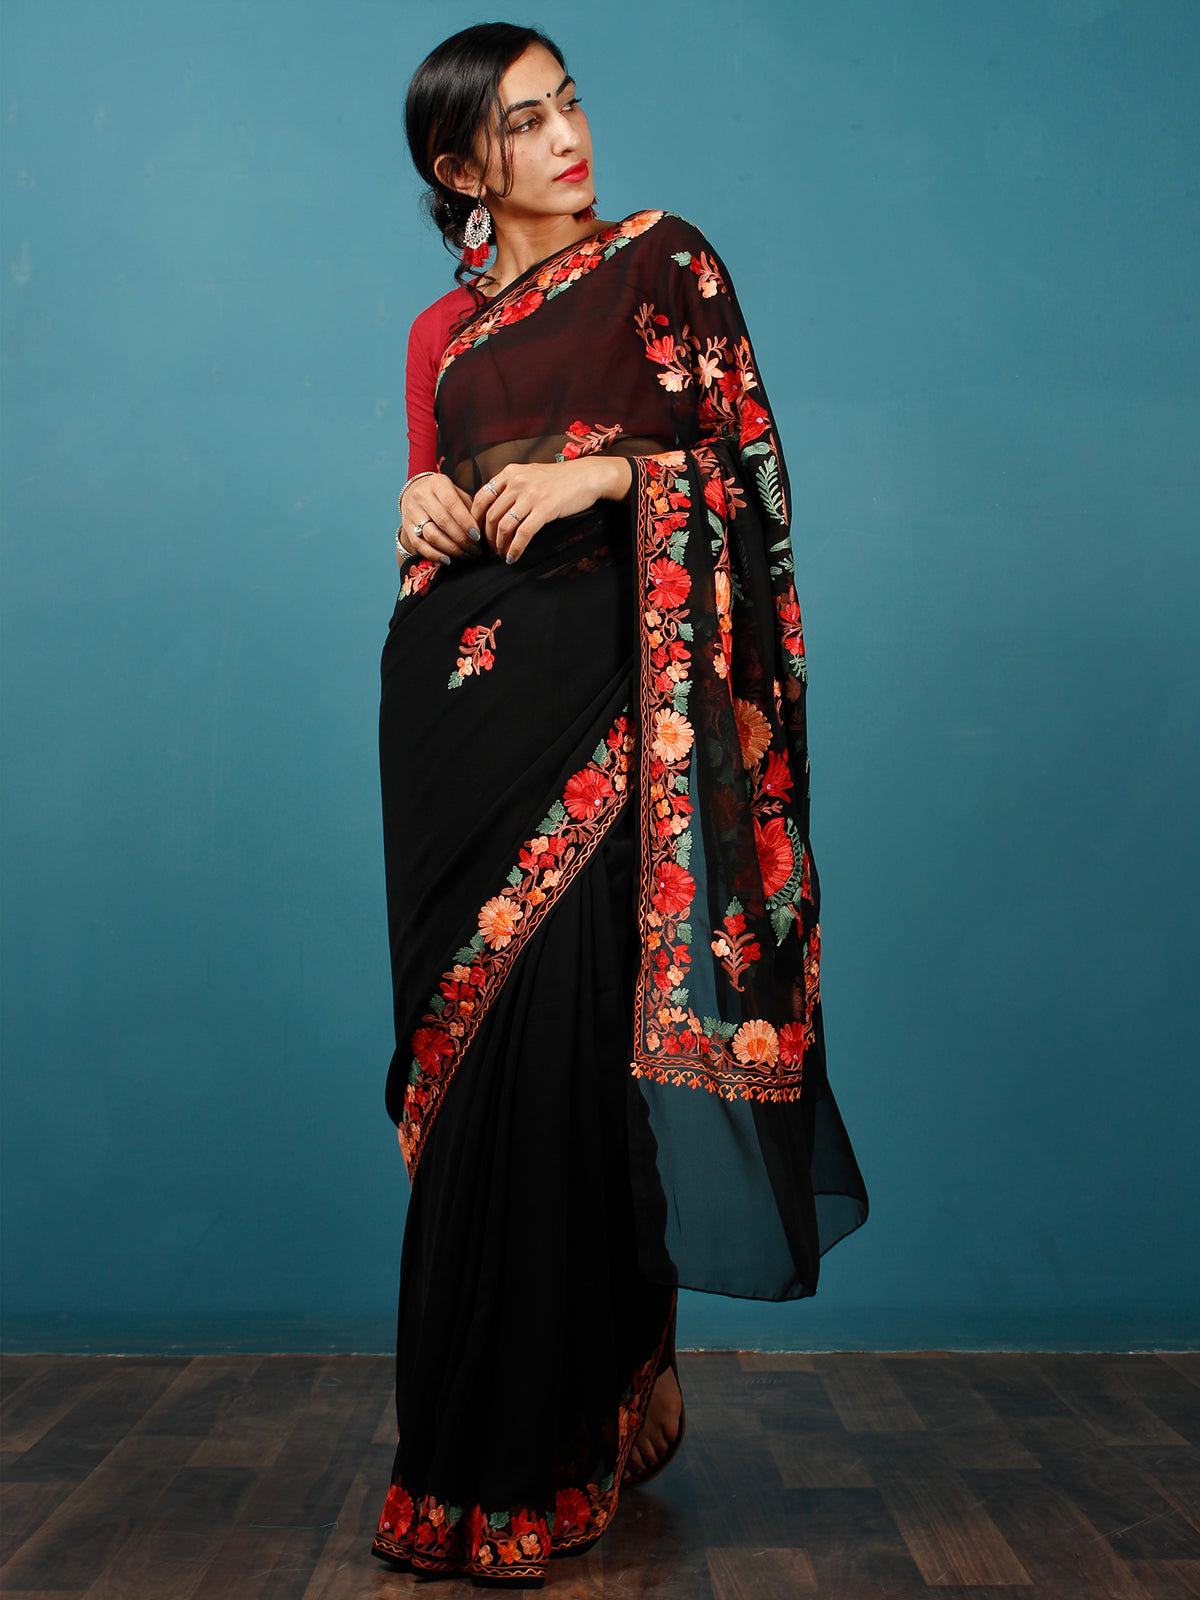 Black Red Green Aari Embroidered Crepe Silk Saree From Kashmir  - S031703055